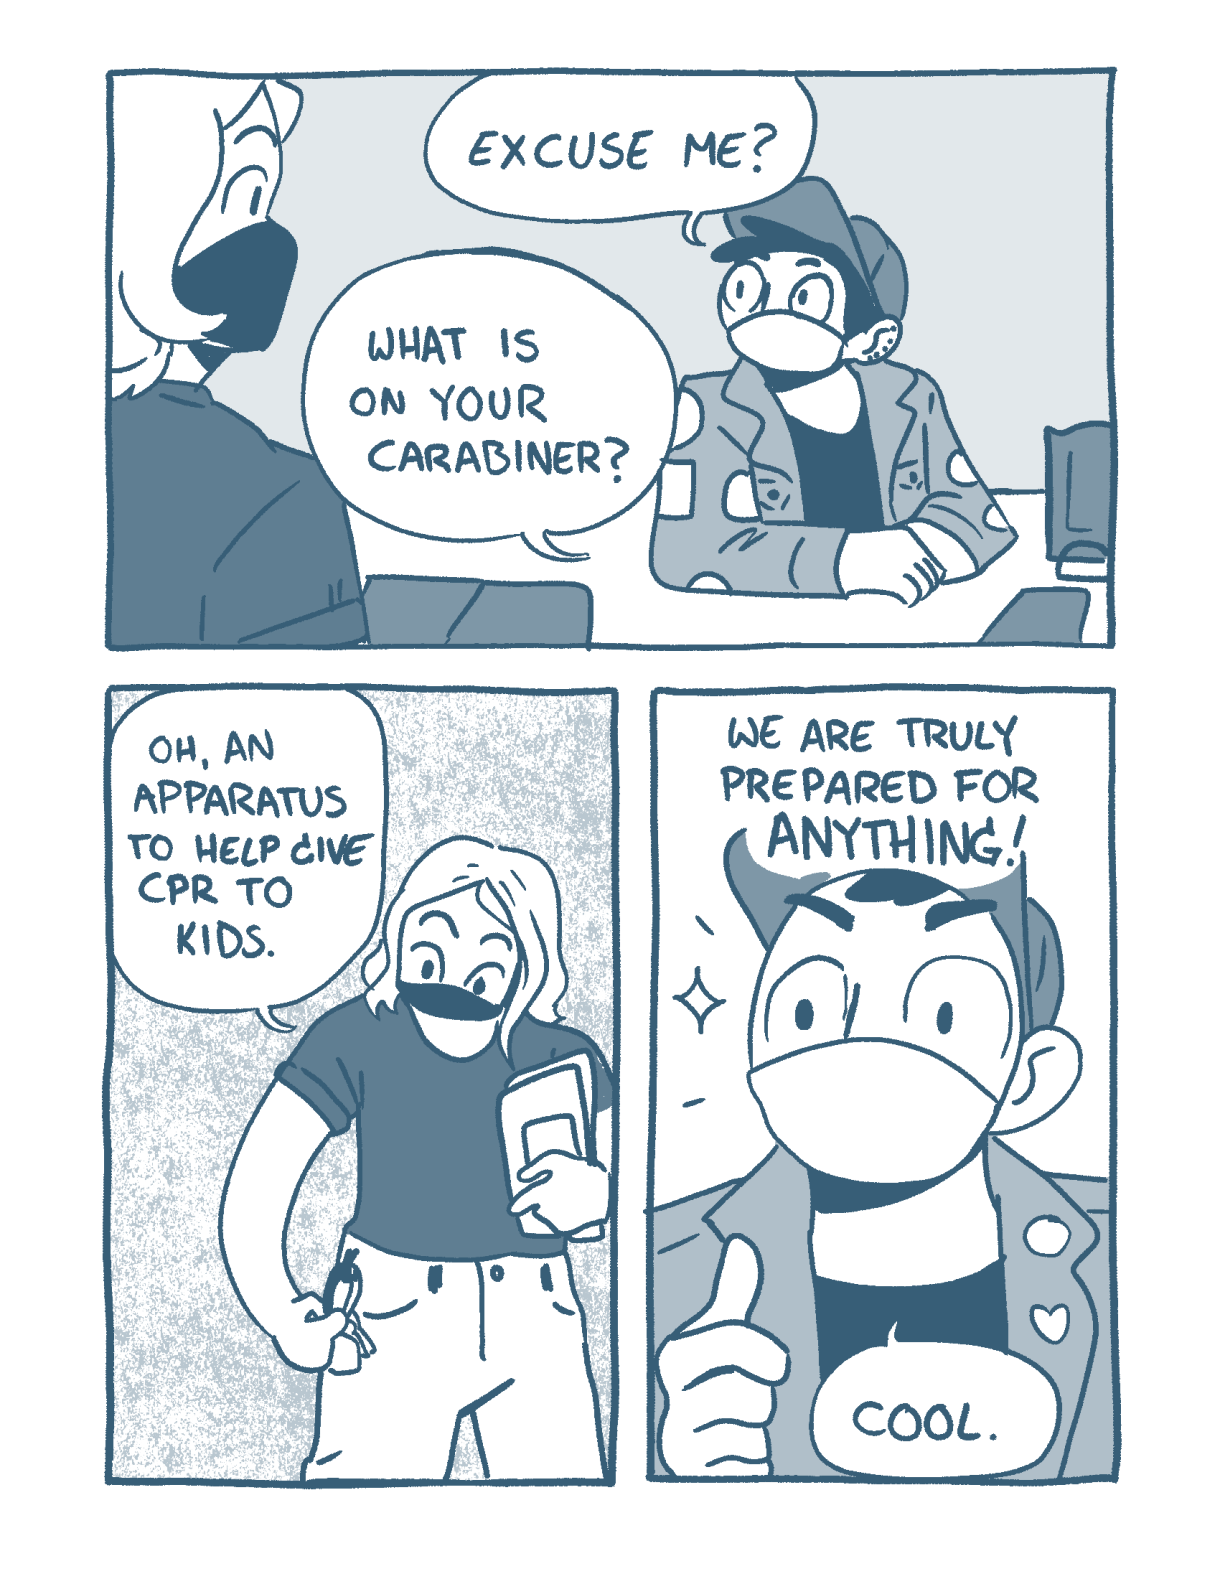 In a three panel comic, two queers are wearing N95 masks and meeting each other for the first time. One says, "excuse me? what is on your carabiner?" The other responds, "oh an apparatus to help give CPR to kids!" and the first queer gives a thumbs up, "We are truly prepared for anything! Cool."